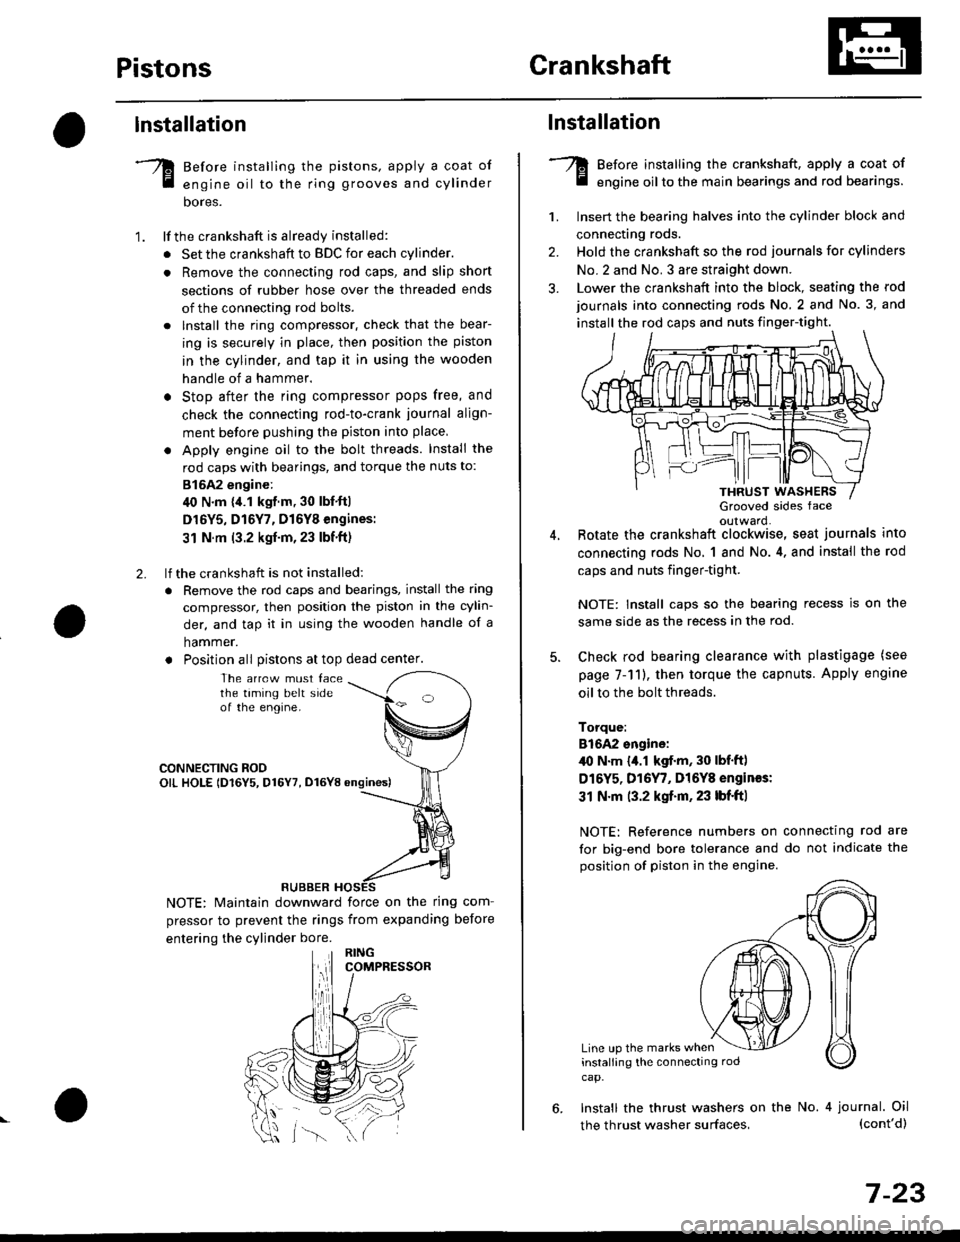 HONDA CIVIC 1999 6.G Owners Guide PistonsGrankshaft
lnstallation
Before installing the pistons, apply a coat of
engine oil to the ring grooves and cylinder
bores.
lf the crankshaft is already installed:
. Set the crankshaft to BDC for